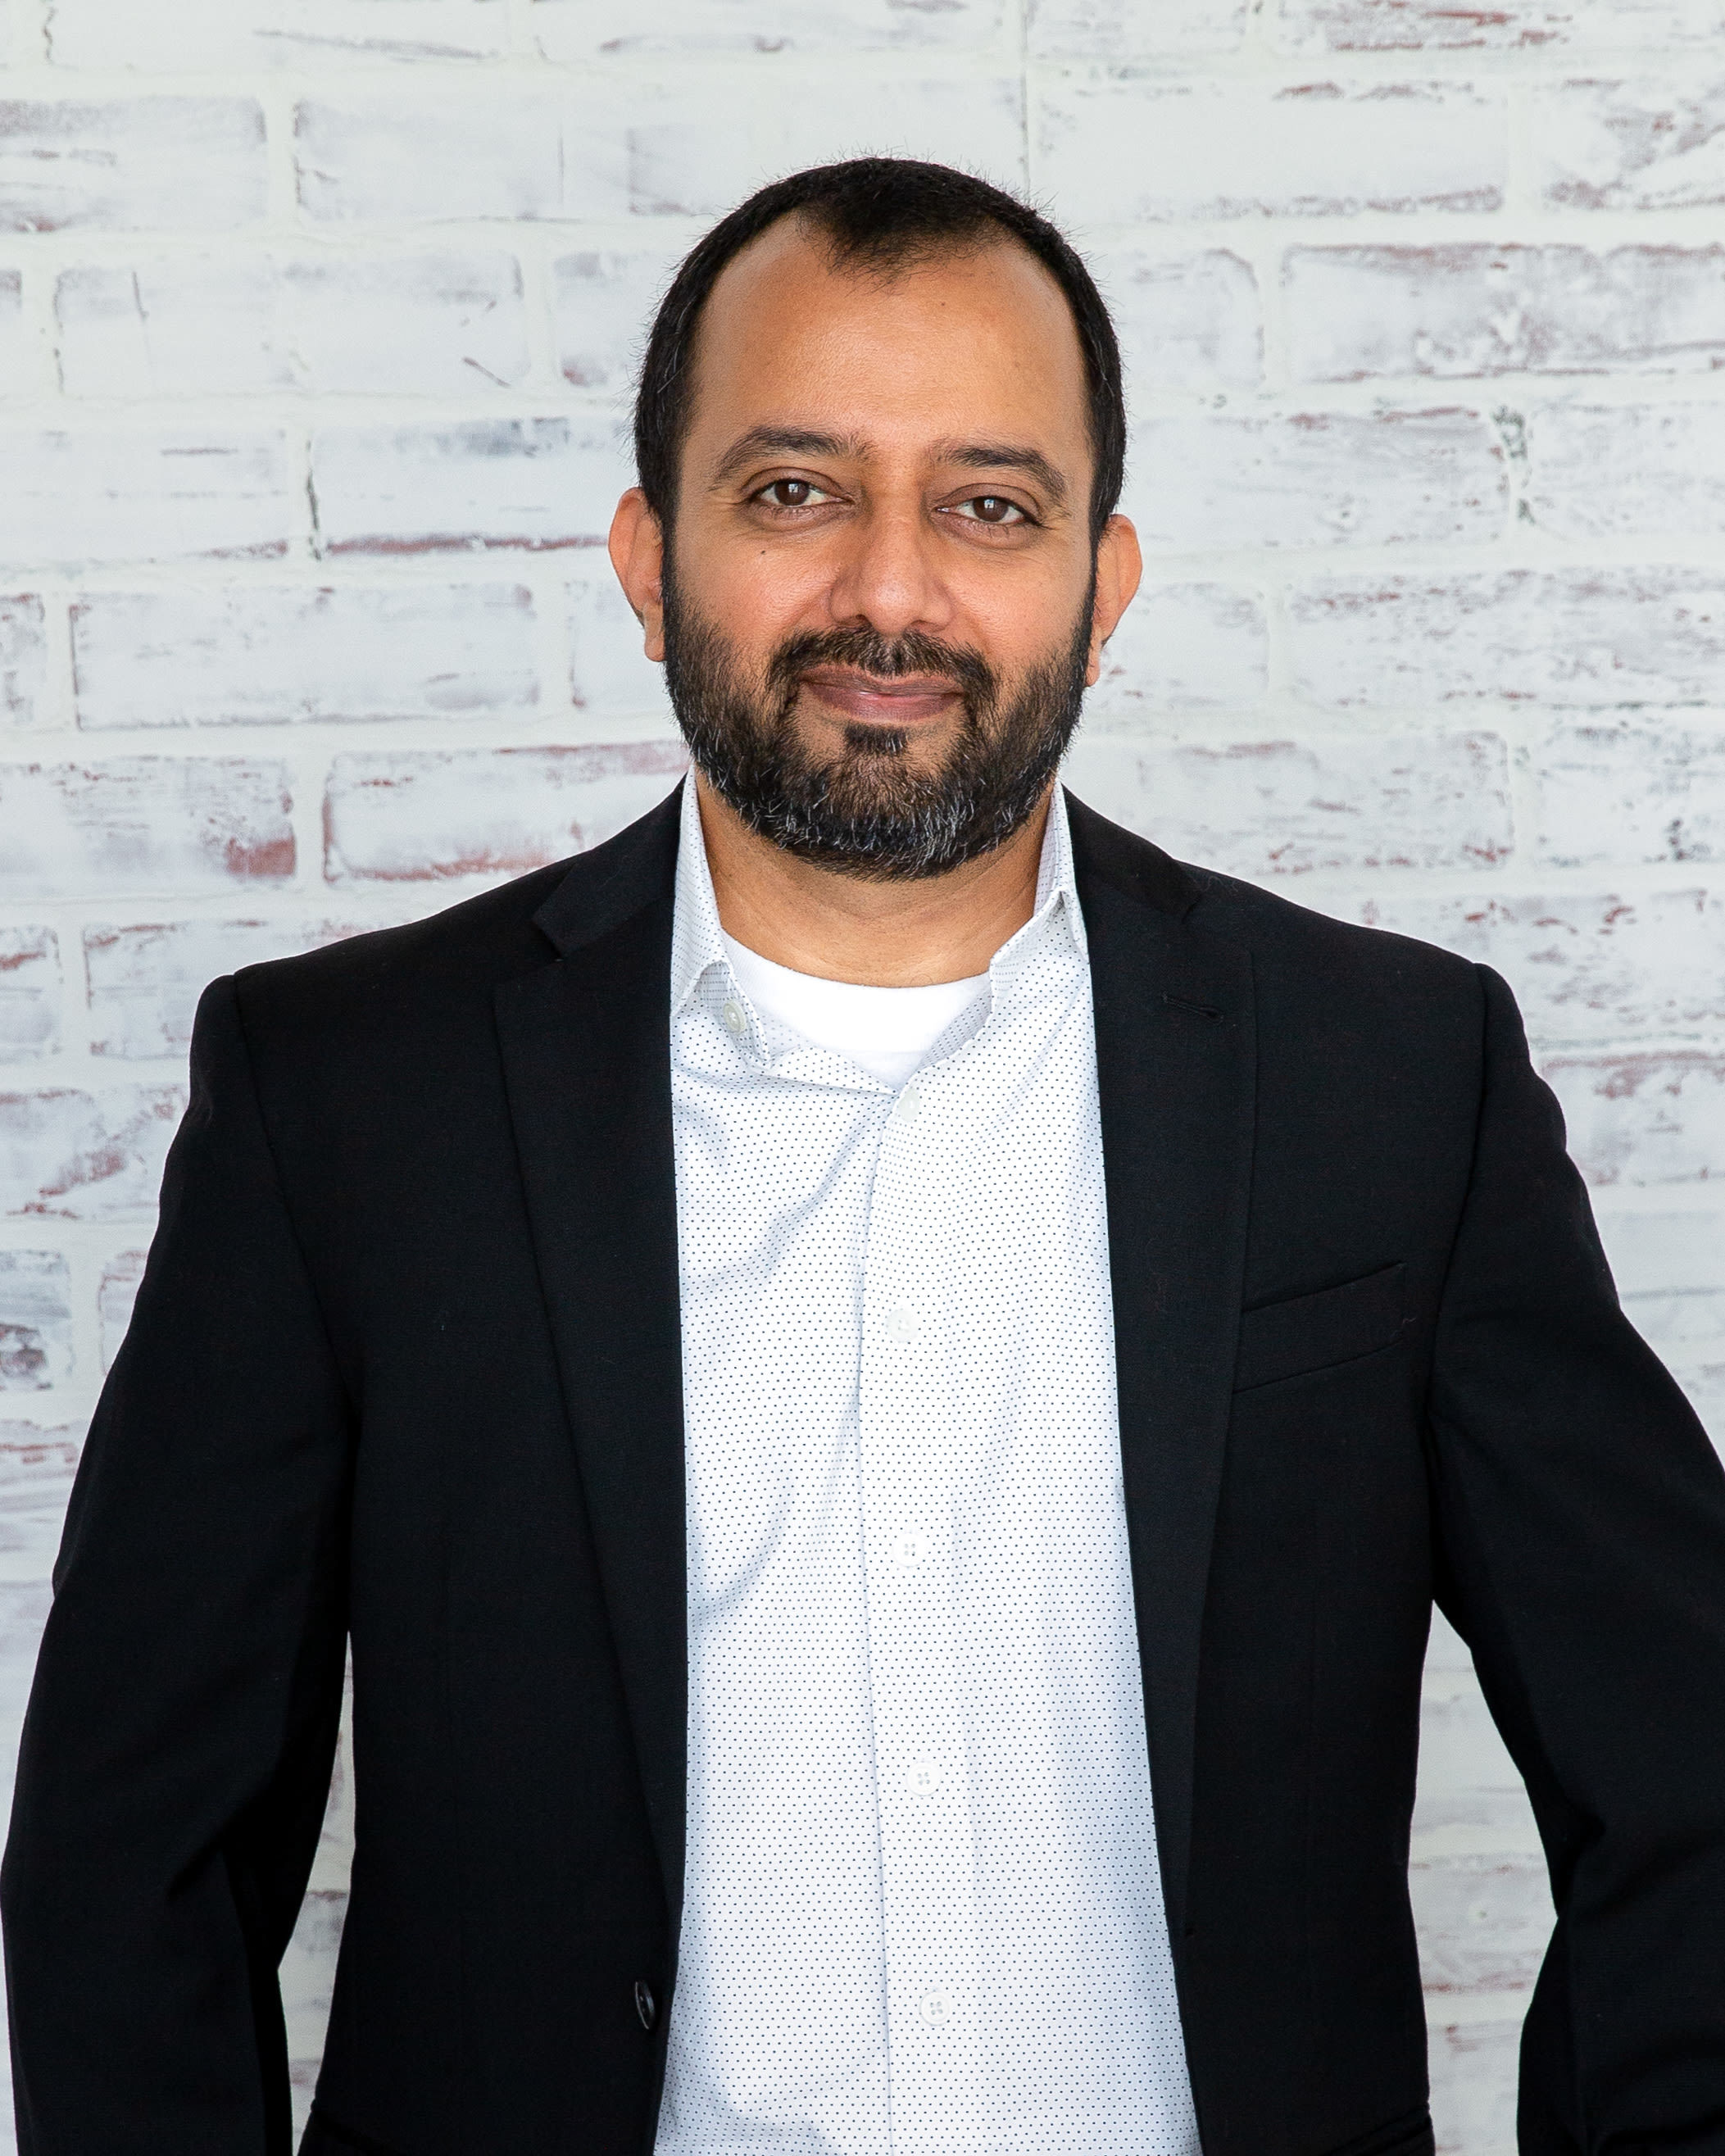 Sumit Sangha,
Founder, Chairman, and Chief Architect